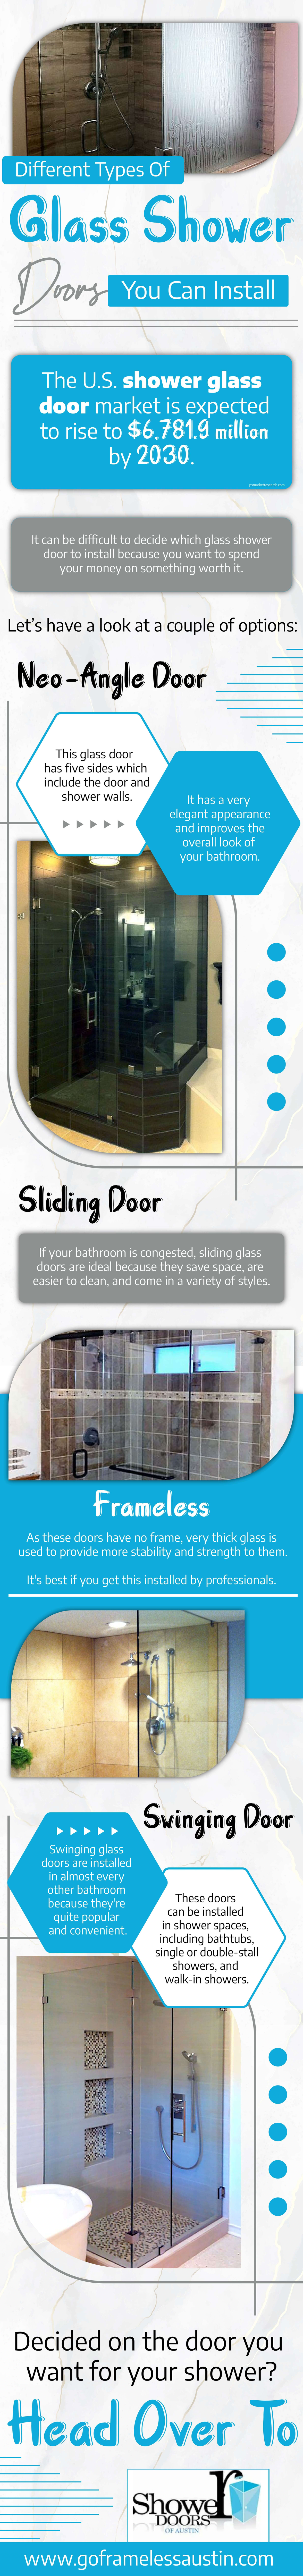 Different Types Of Glass Shower Doors You Can Install